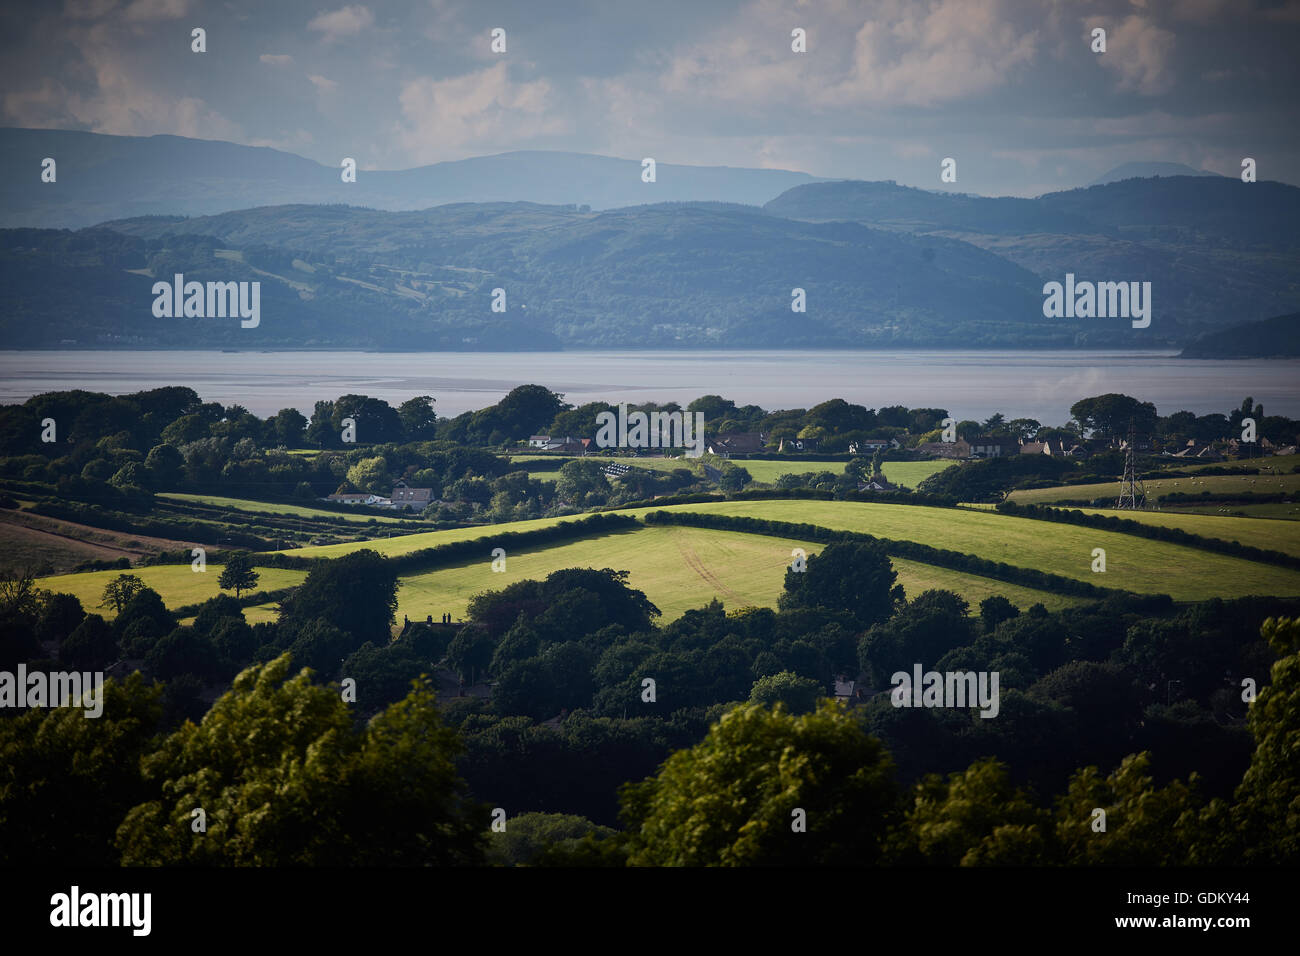 Lancashire rural view landscape looking out to the coast coastal sea irish hills Countryside fields farmland grazing long grass Stock Photo